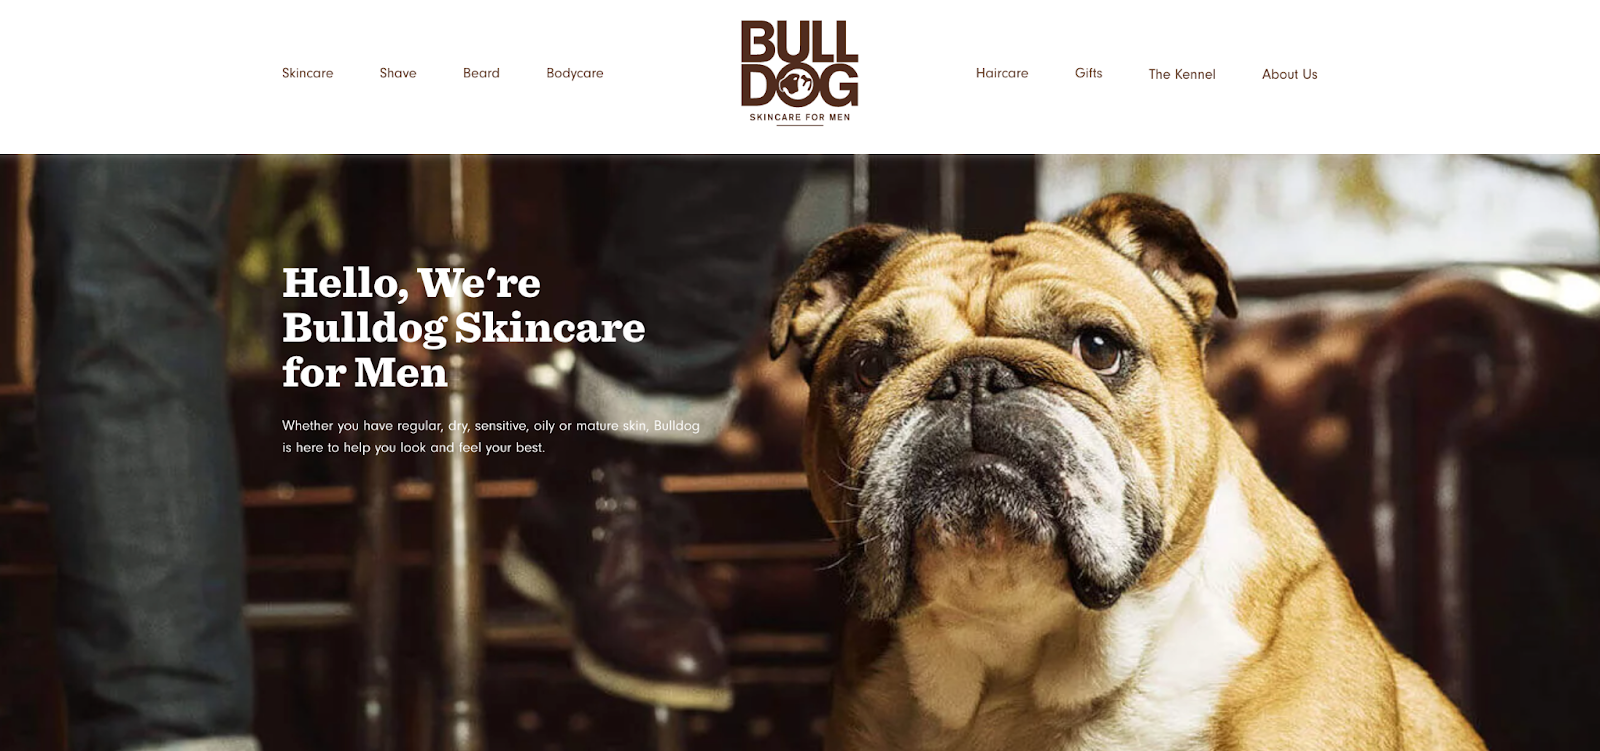 About Us Page Examples: Bulldog Skincare